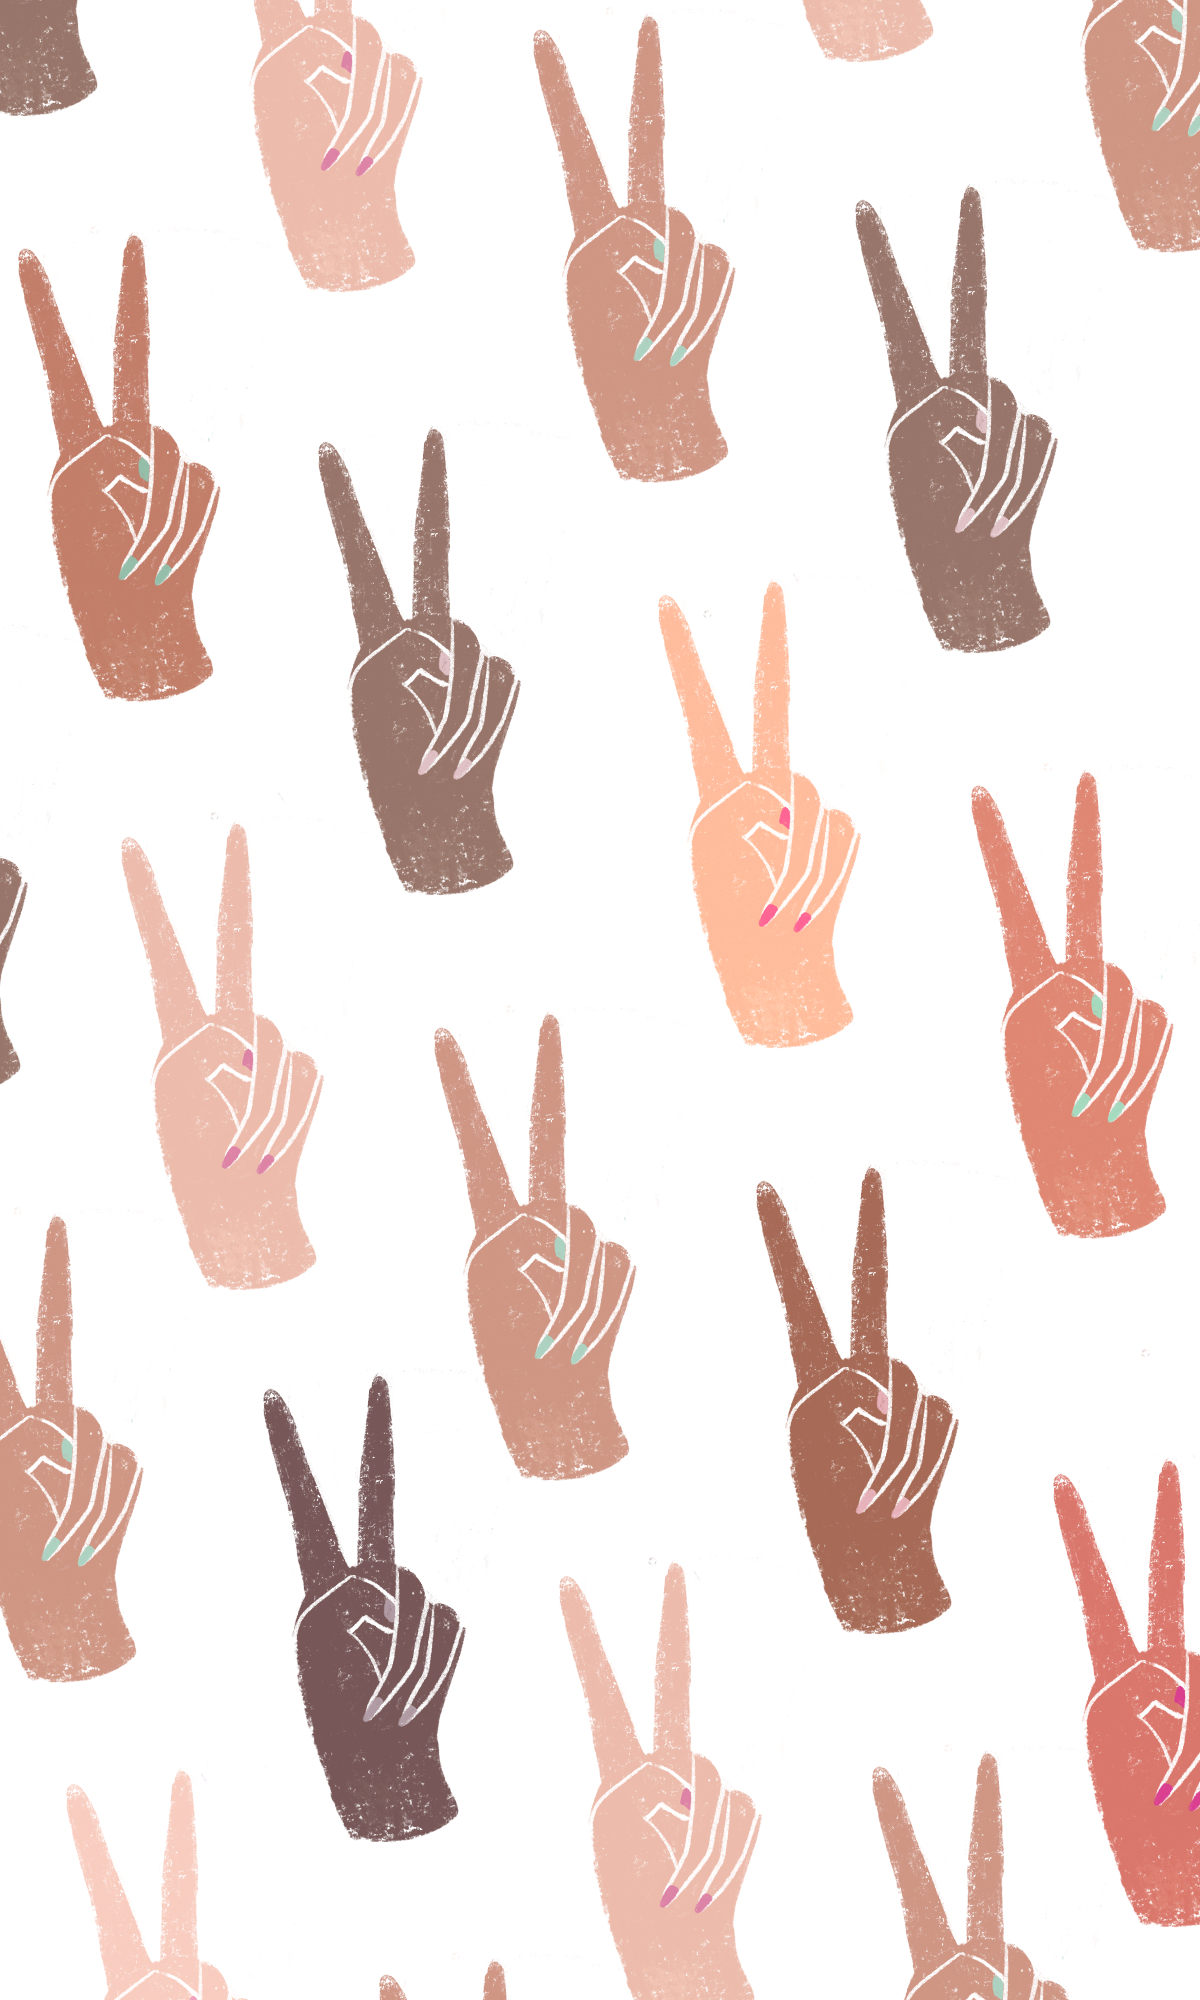 1200x2000 Peace #Signs. #Casetify #iPhone #Art #Design #Illustration | Painting wallpaper, Prints, Aesthetic iphone wallpaper